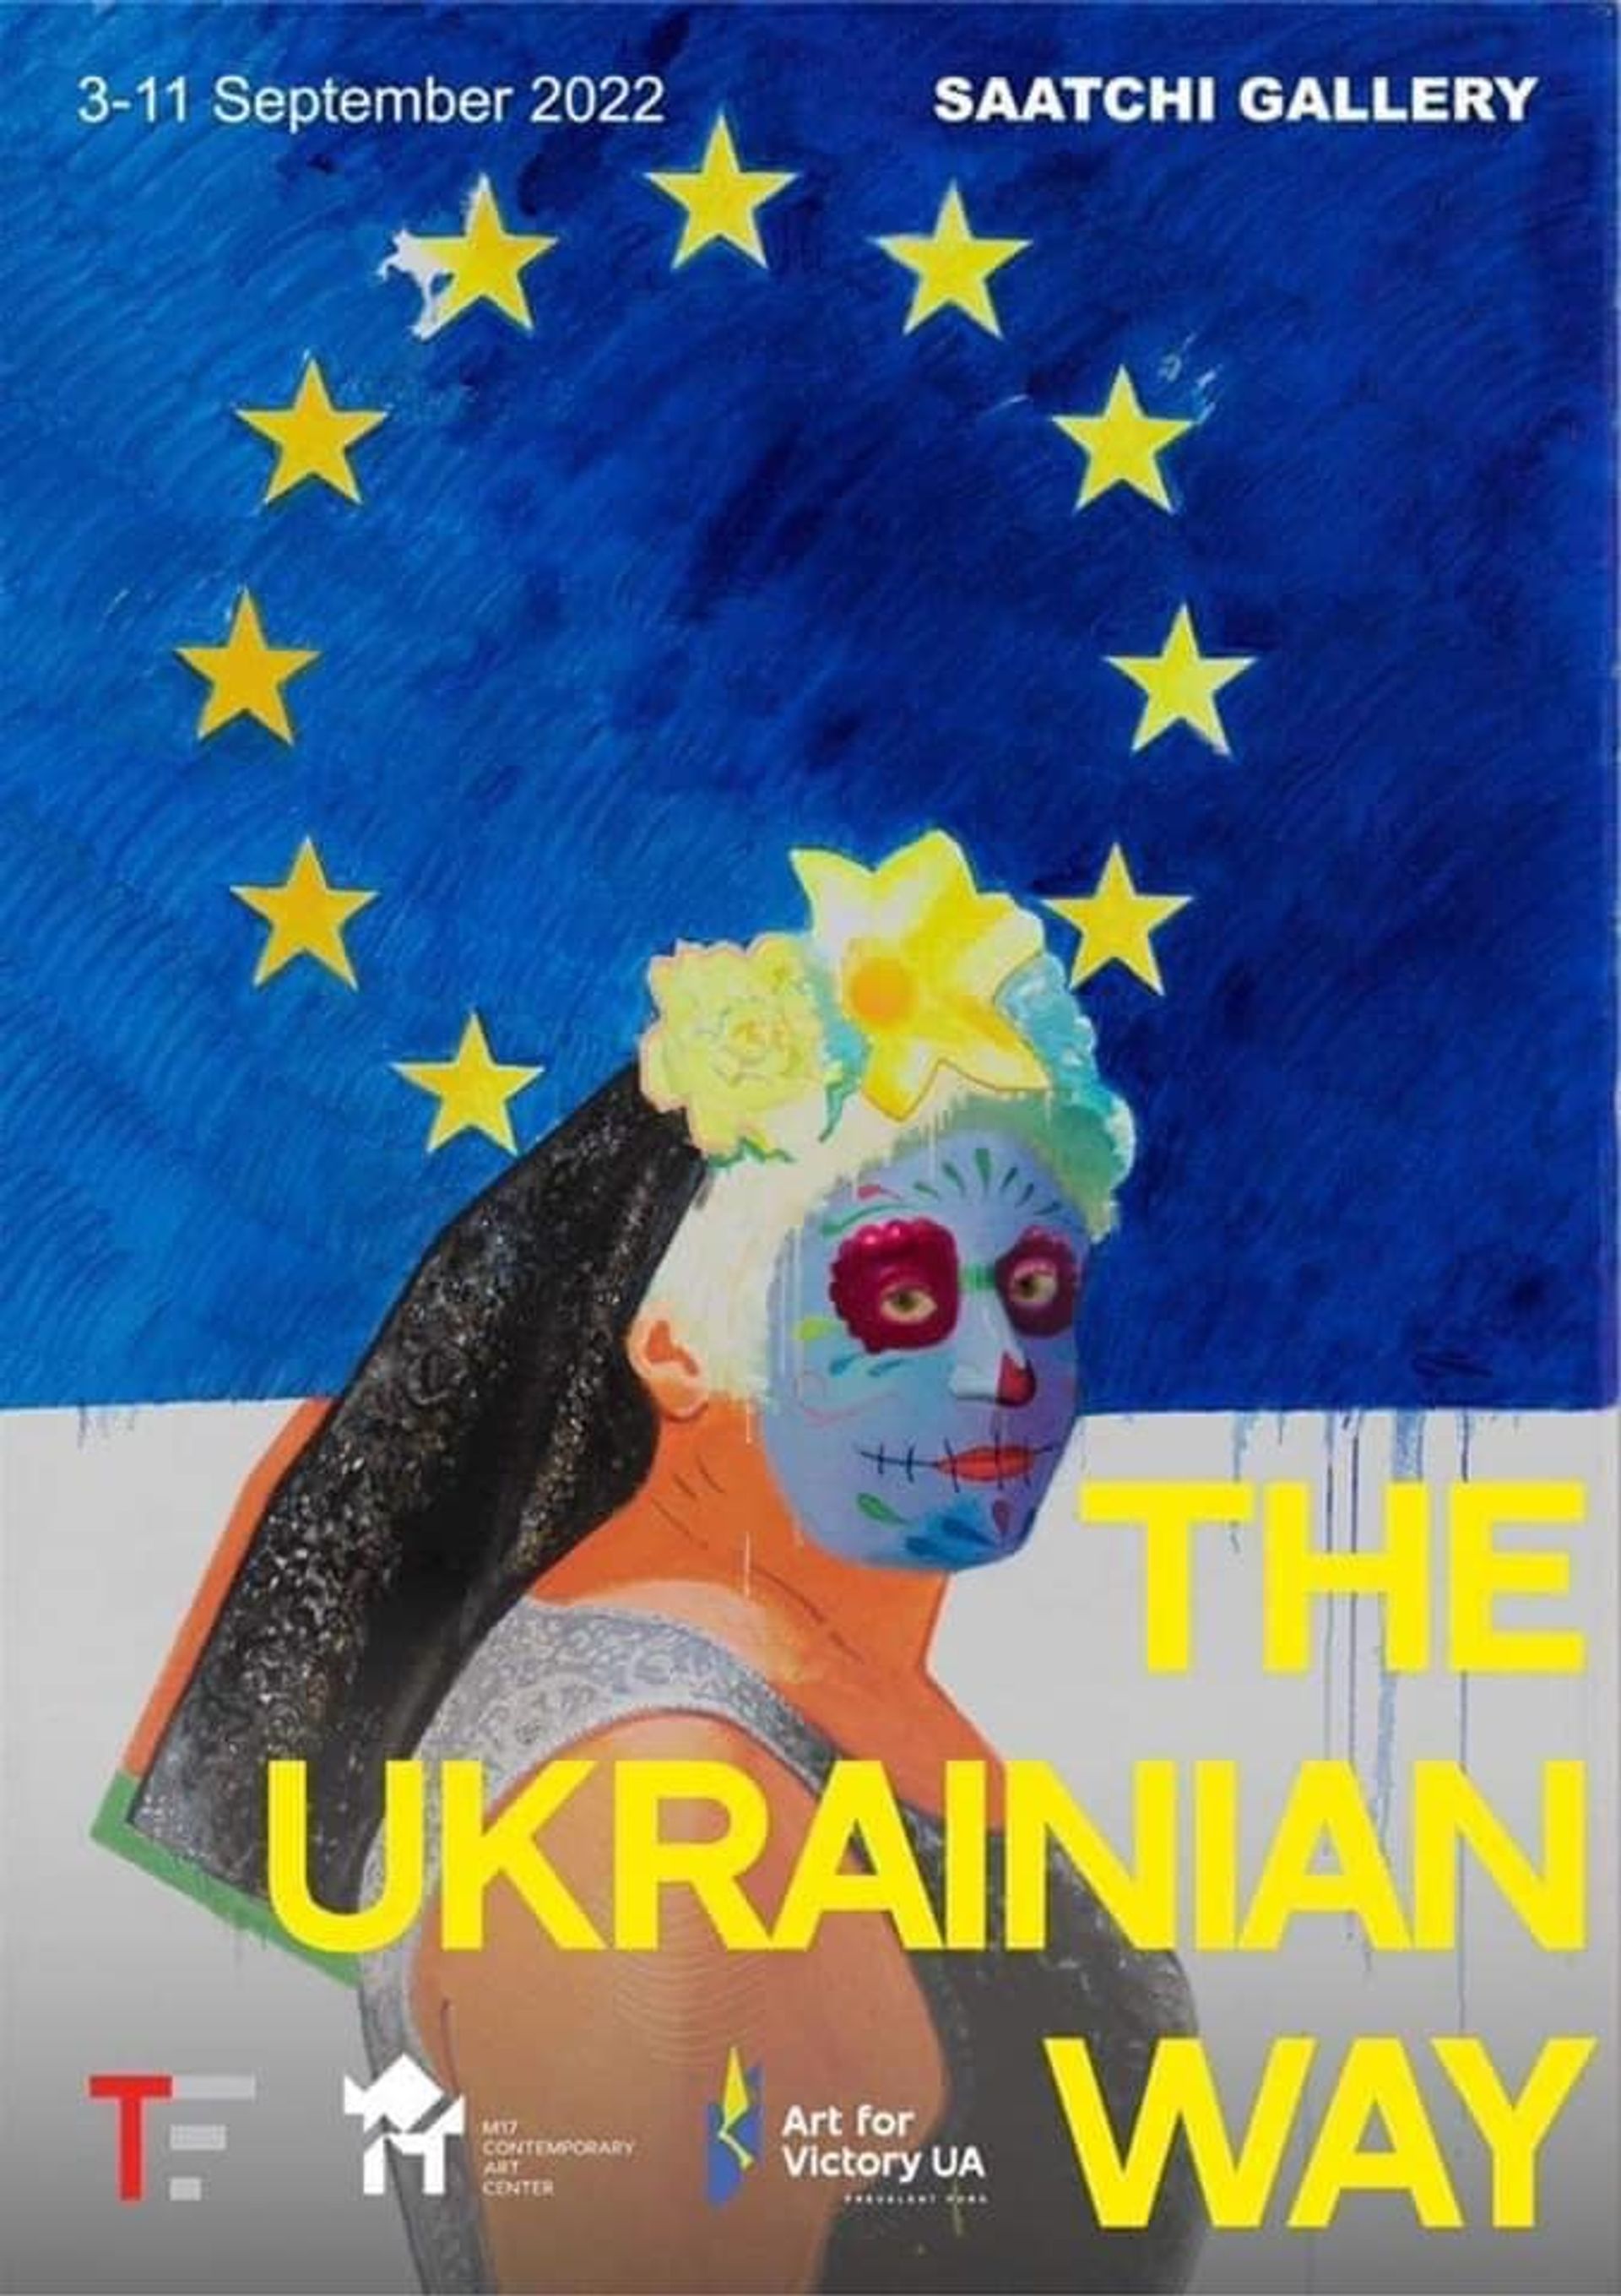 The promotional poster for The Ukrainian Way exhibition at Saatchi Gallery in London 